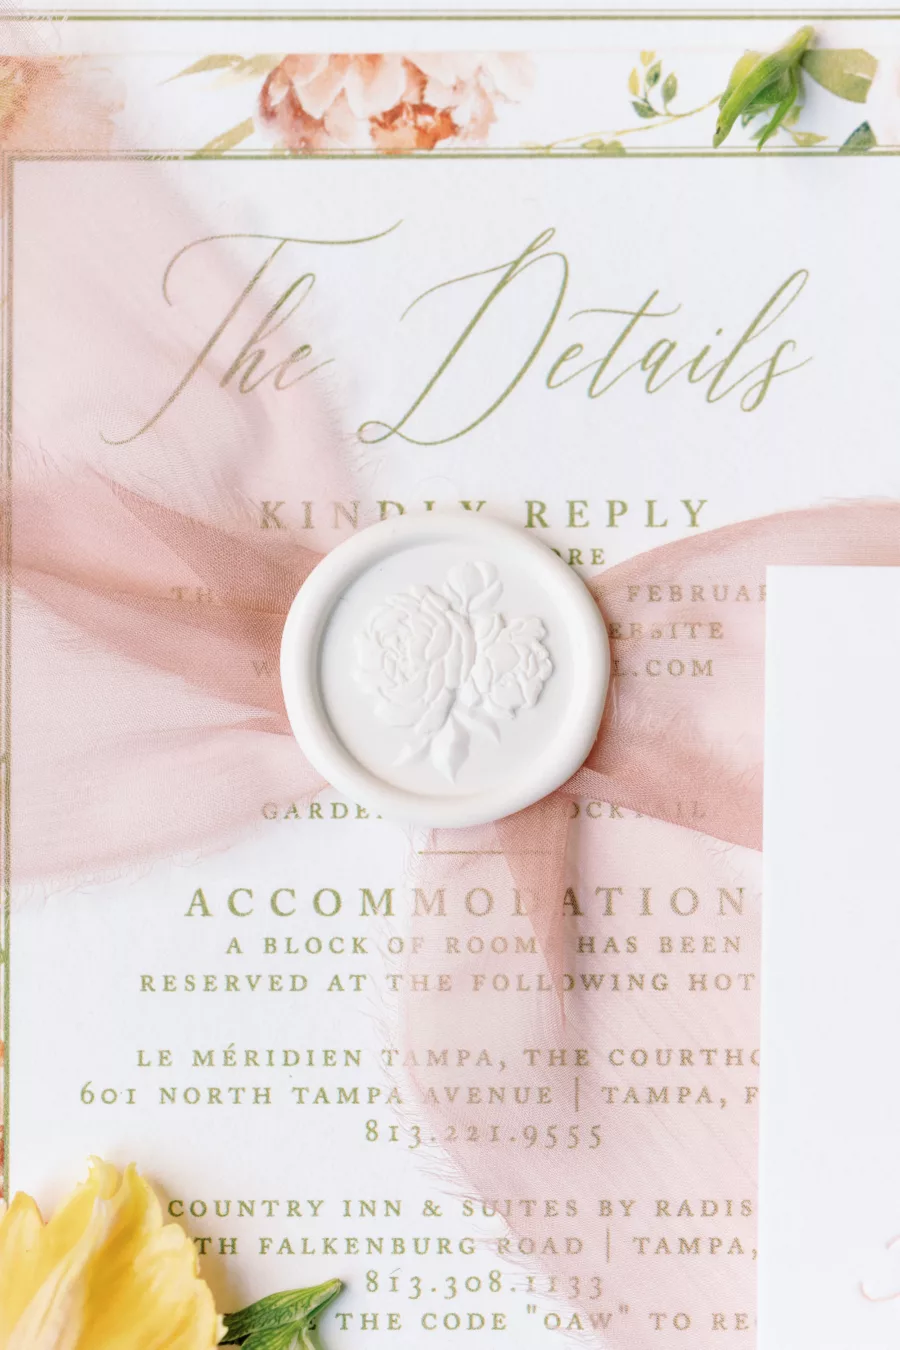 The Details Wedding Invitation Card with White Seal and Pink Ribbon Belly Band Inspiration